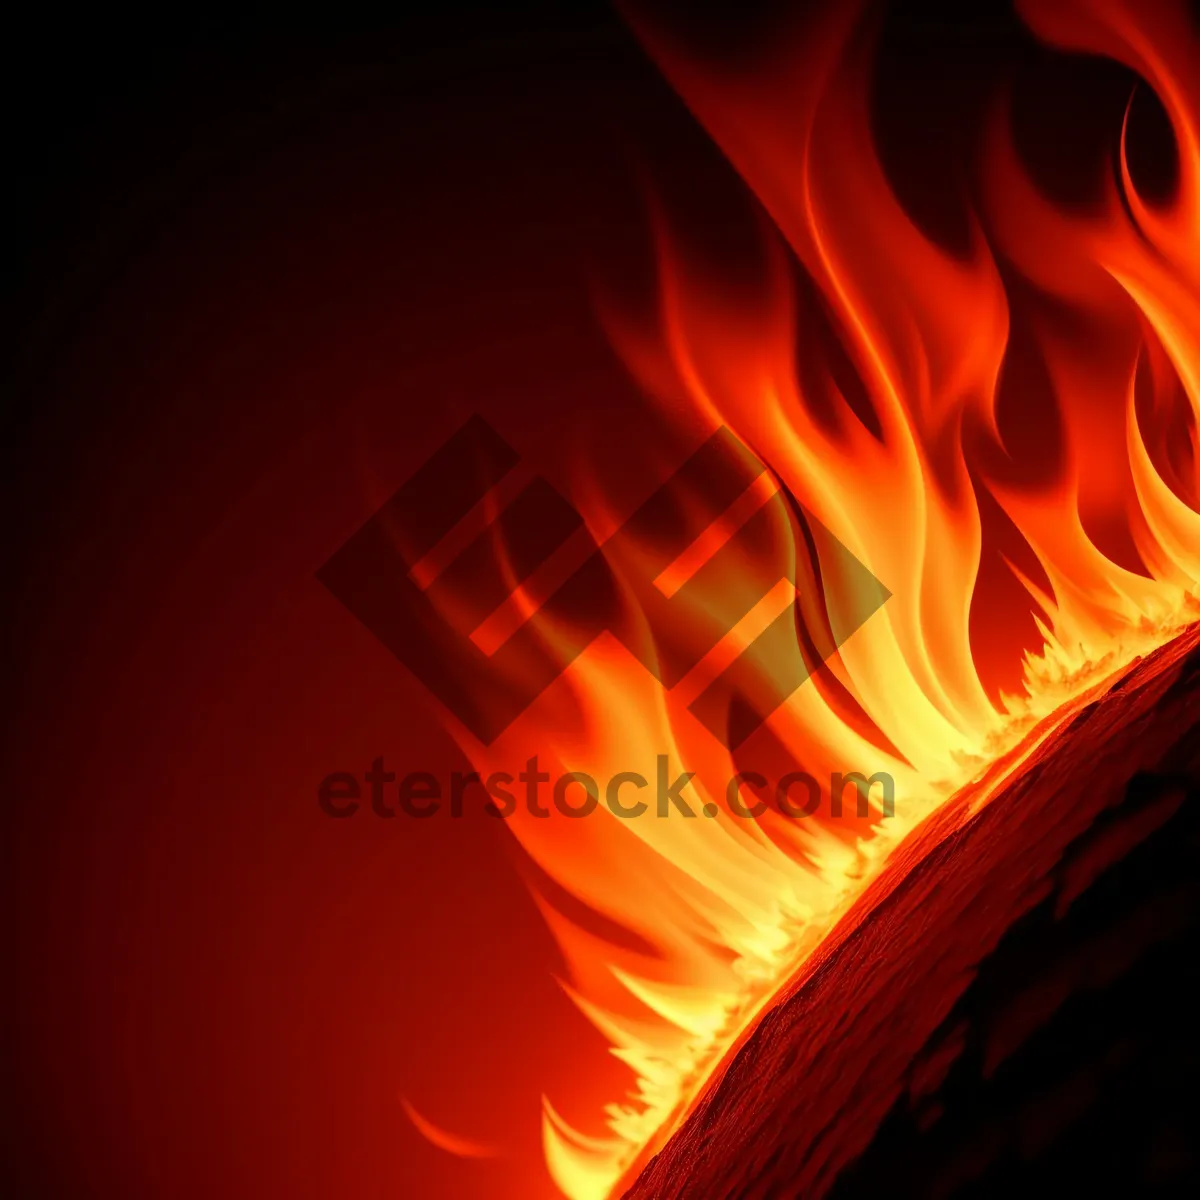 Picture of Blazing Inferno: A Fiery and Dynamic Flame Design